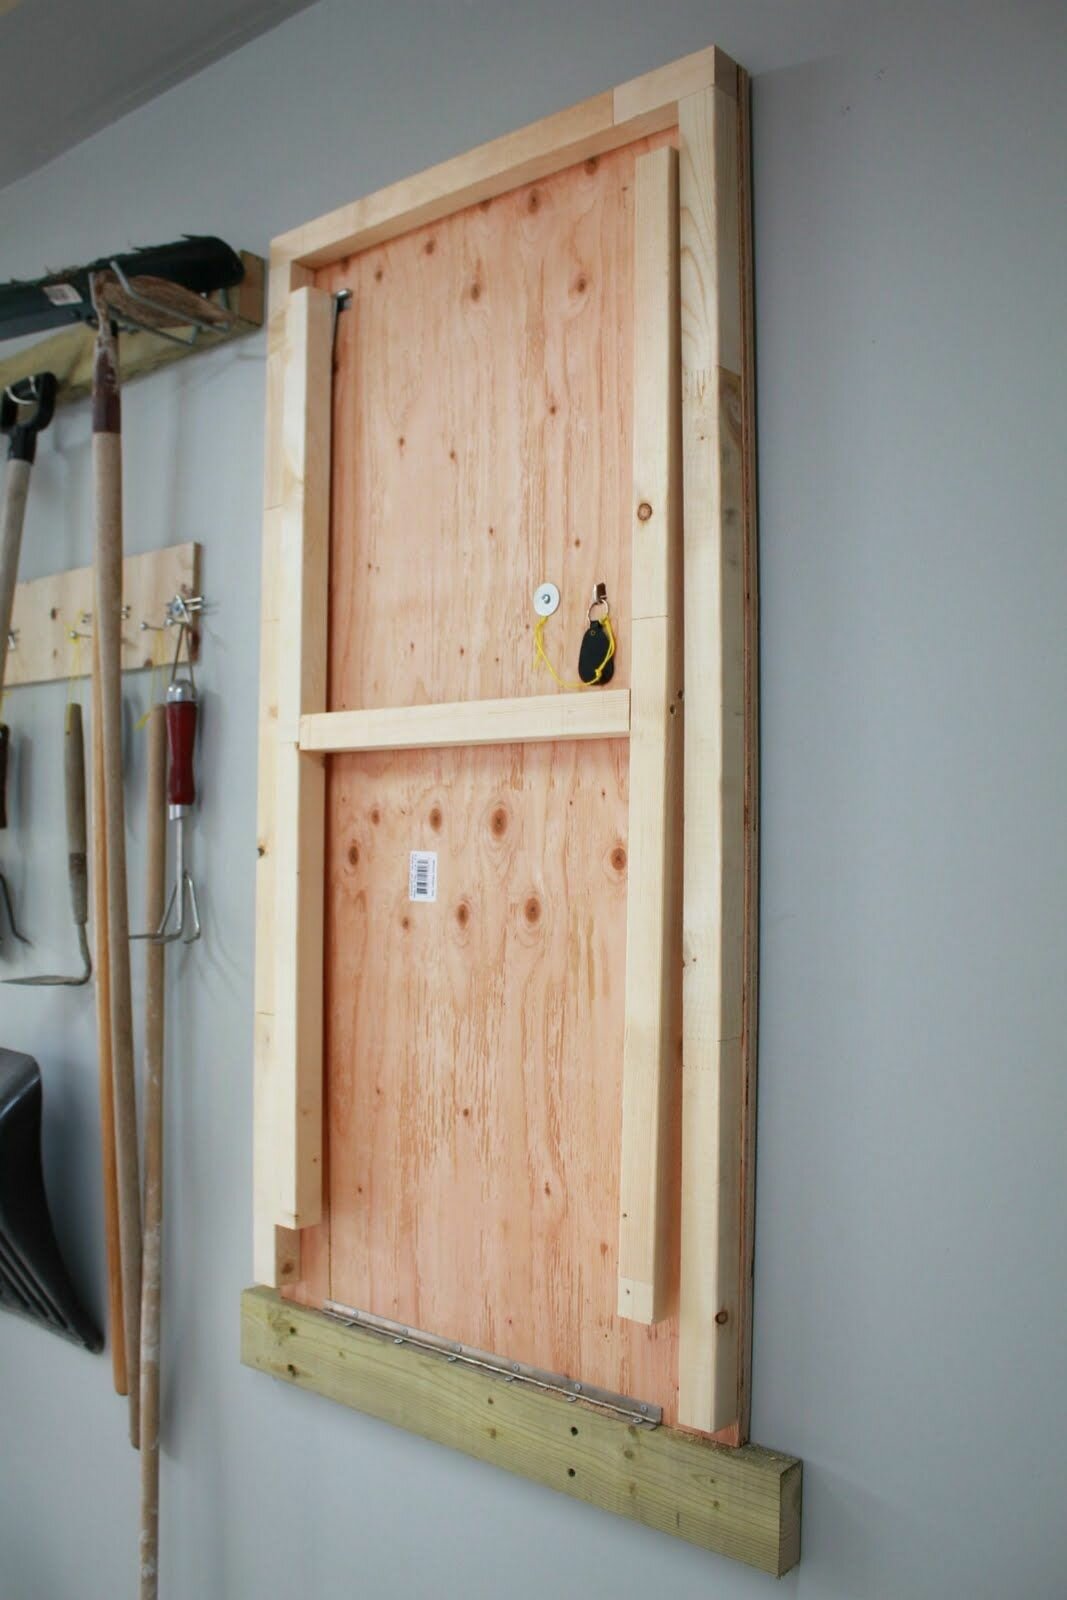 Wall Mounted Folding Workbench | Fold Down Workbench Plans Free | Collapsable Workbench